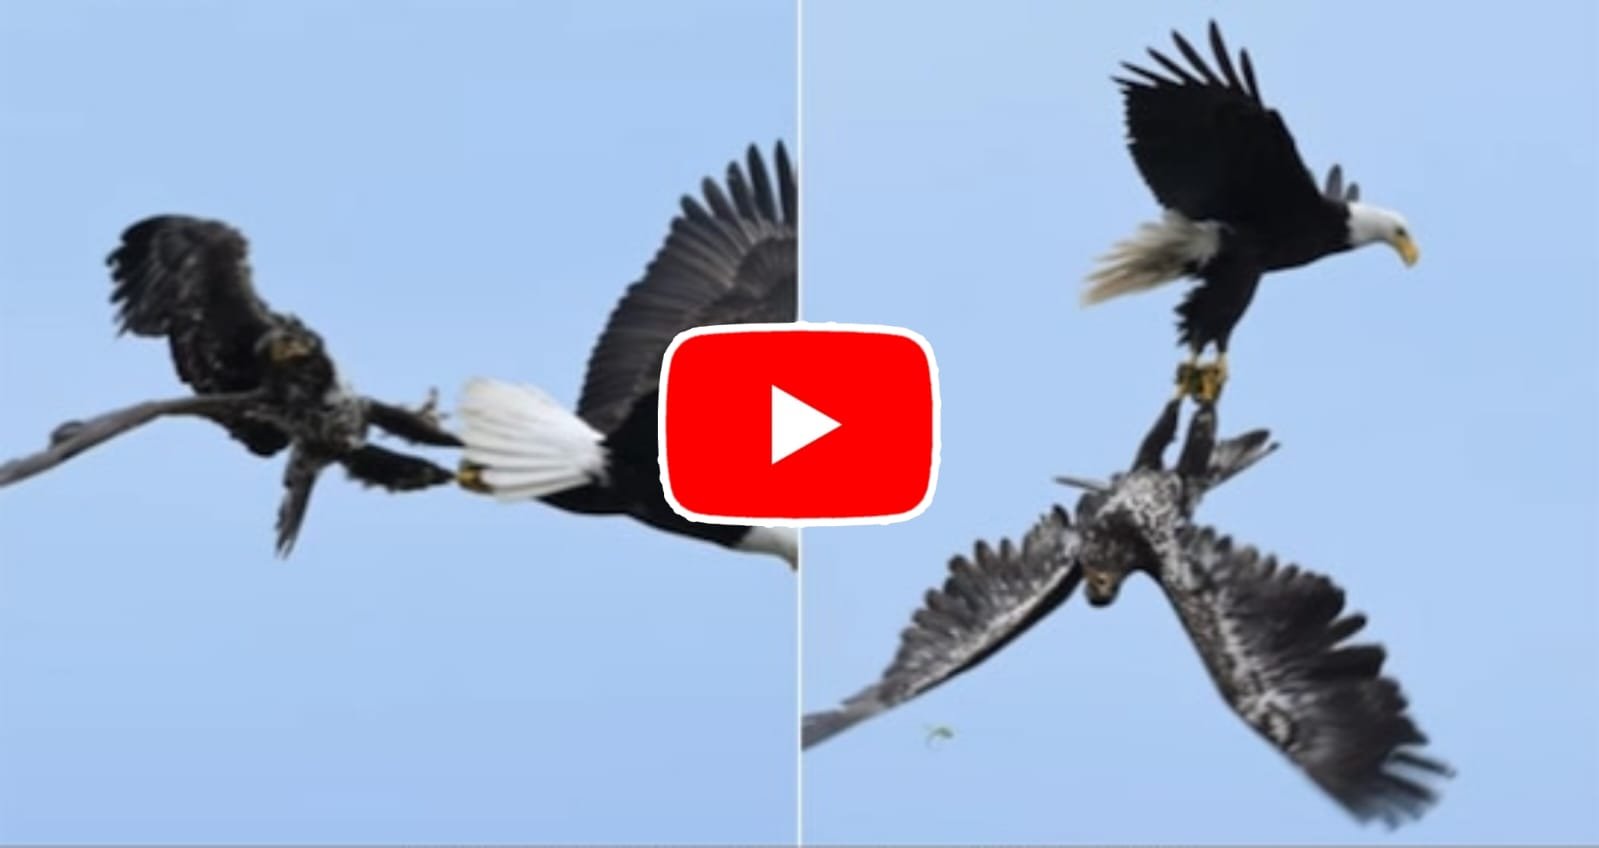 Eagle Fight Video: Two birds of prey fought fiercely in the sky